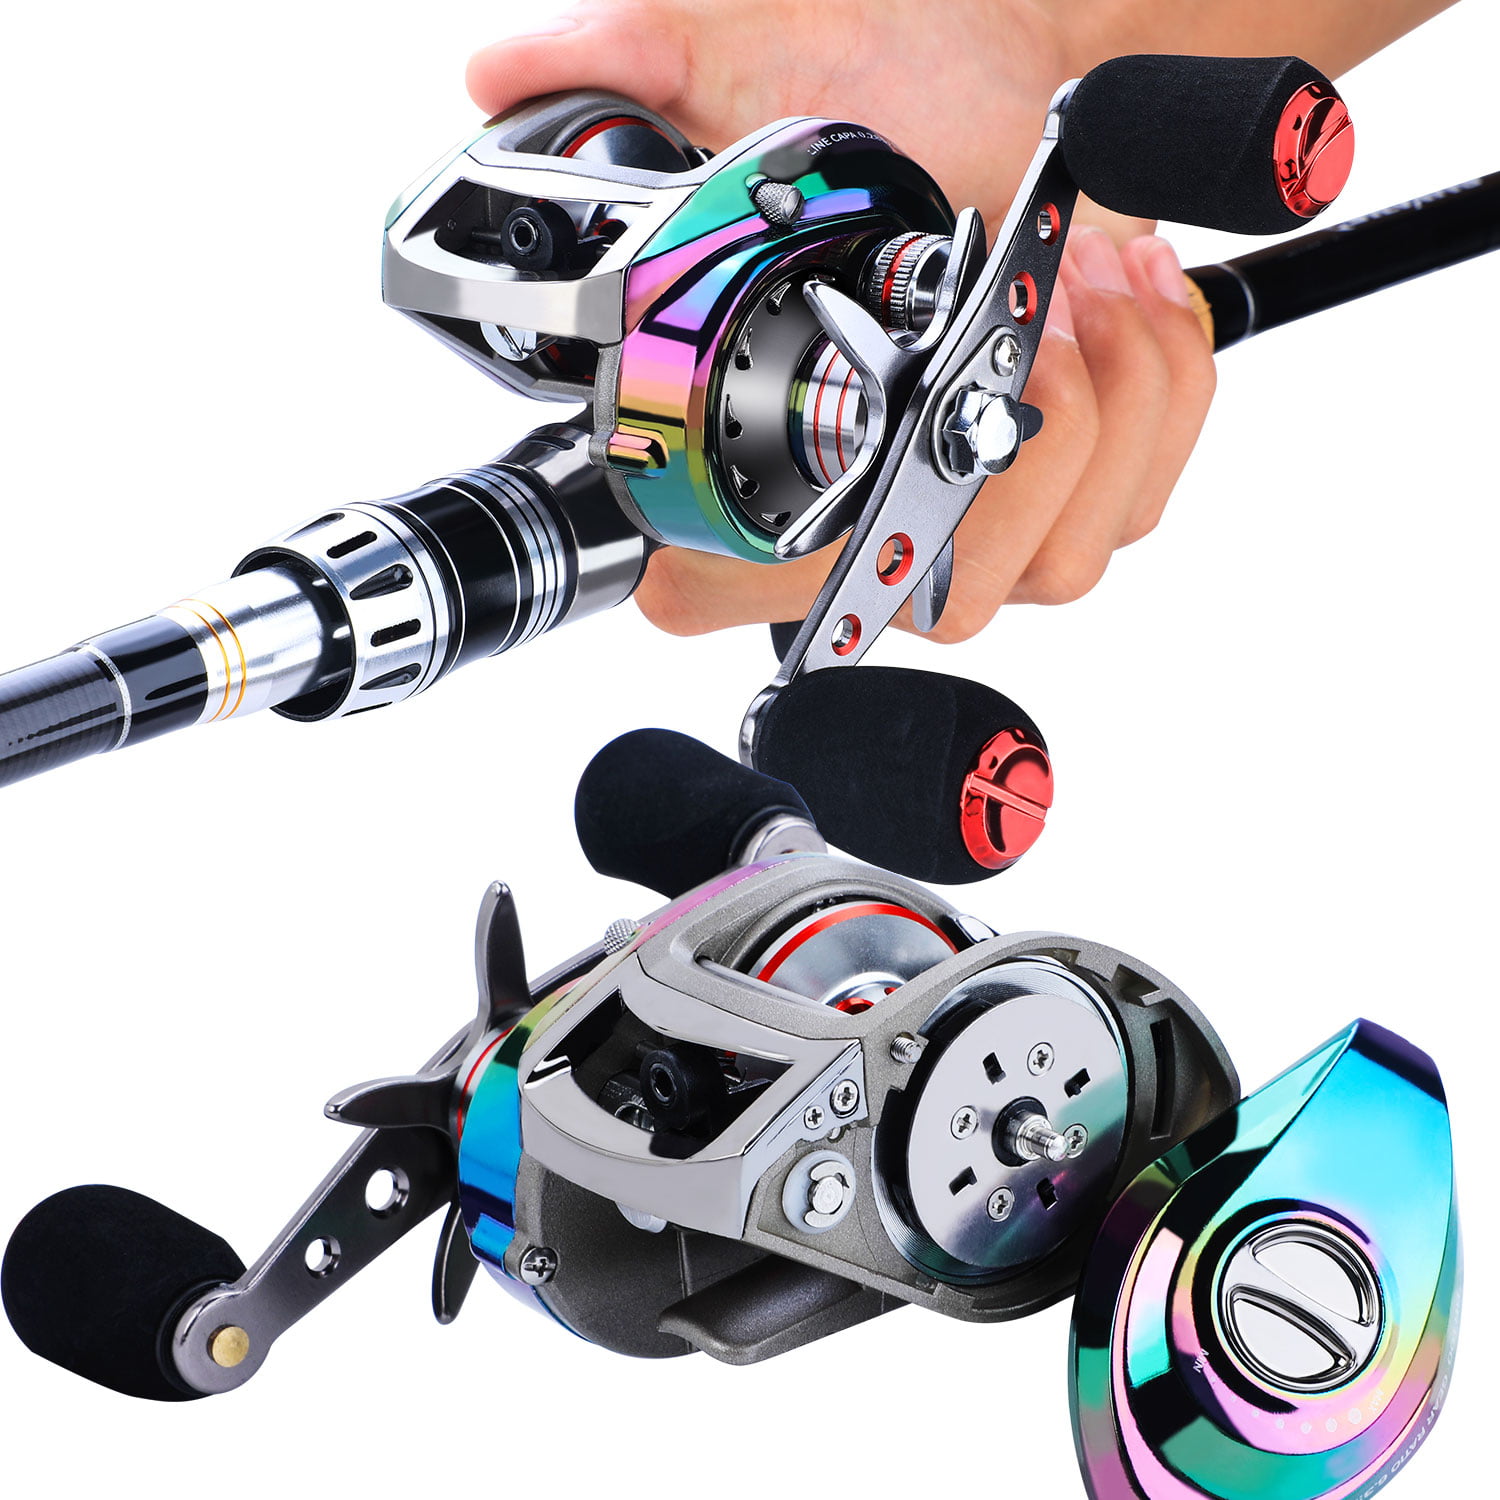 Baitcasting Reel Smooth Saltwater Fishing Reel for Surf Fishing River JH100  left 